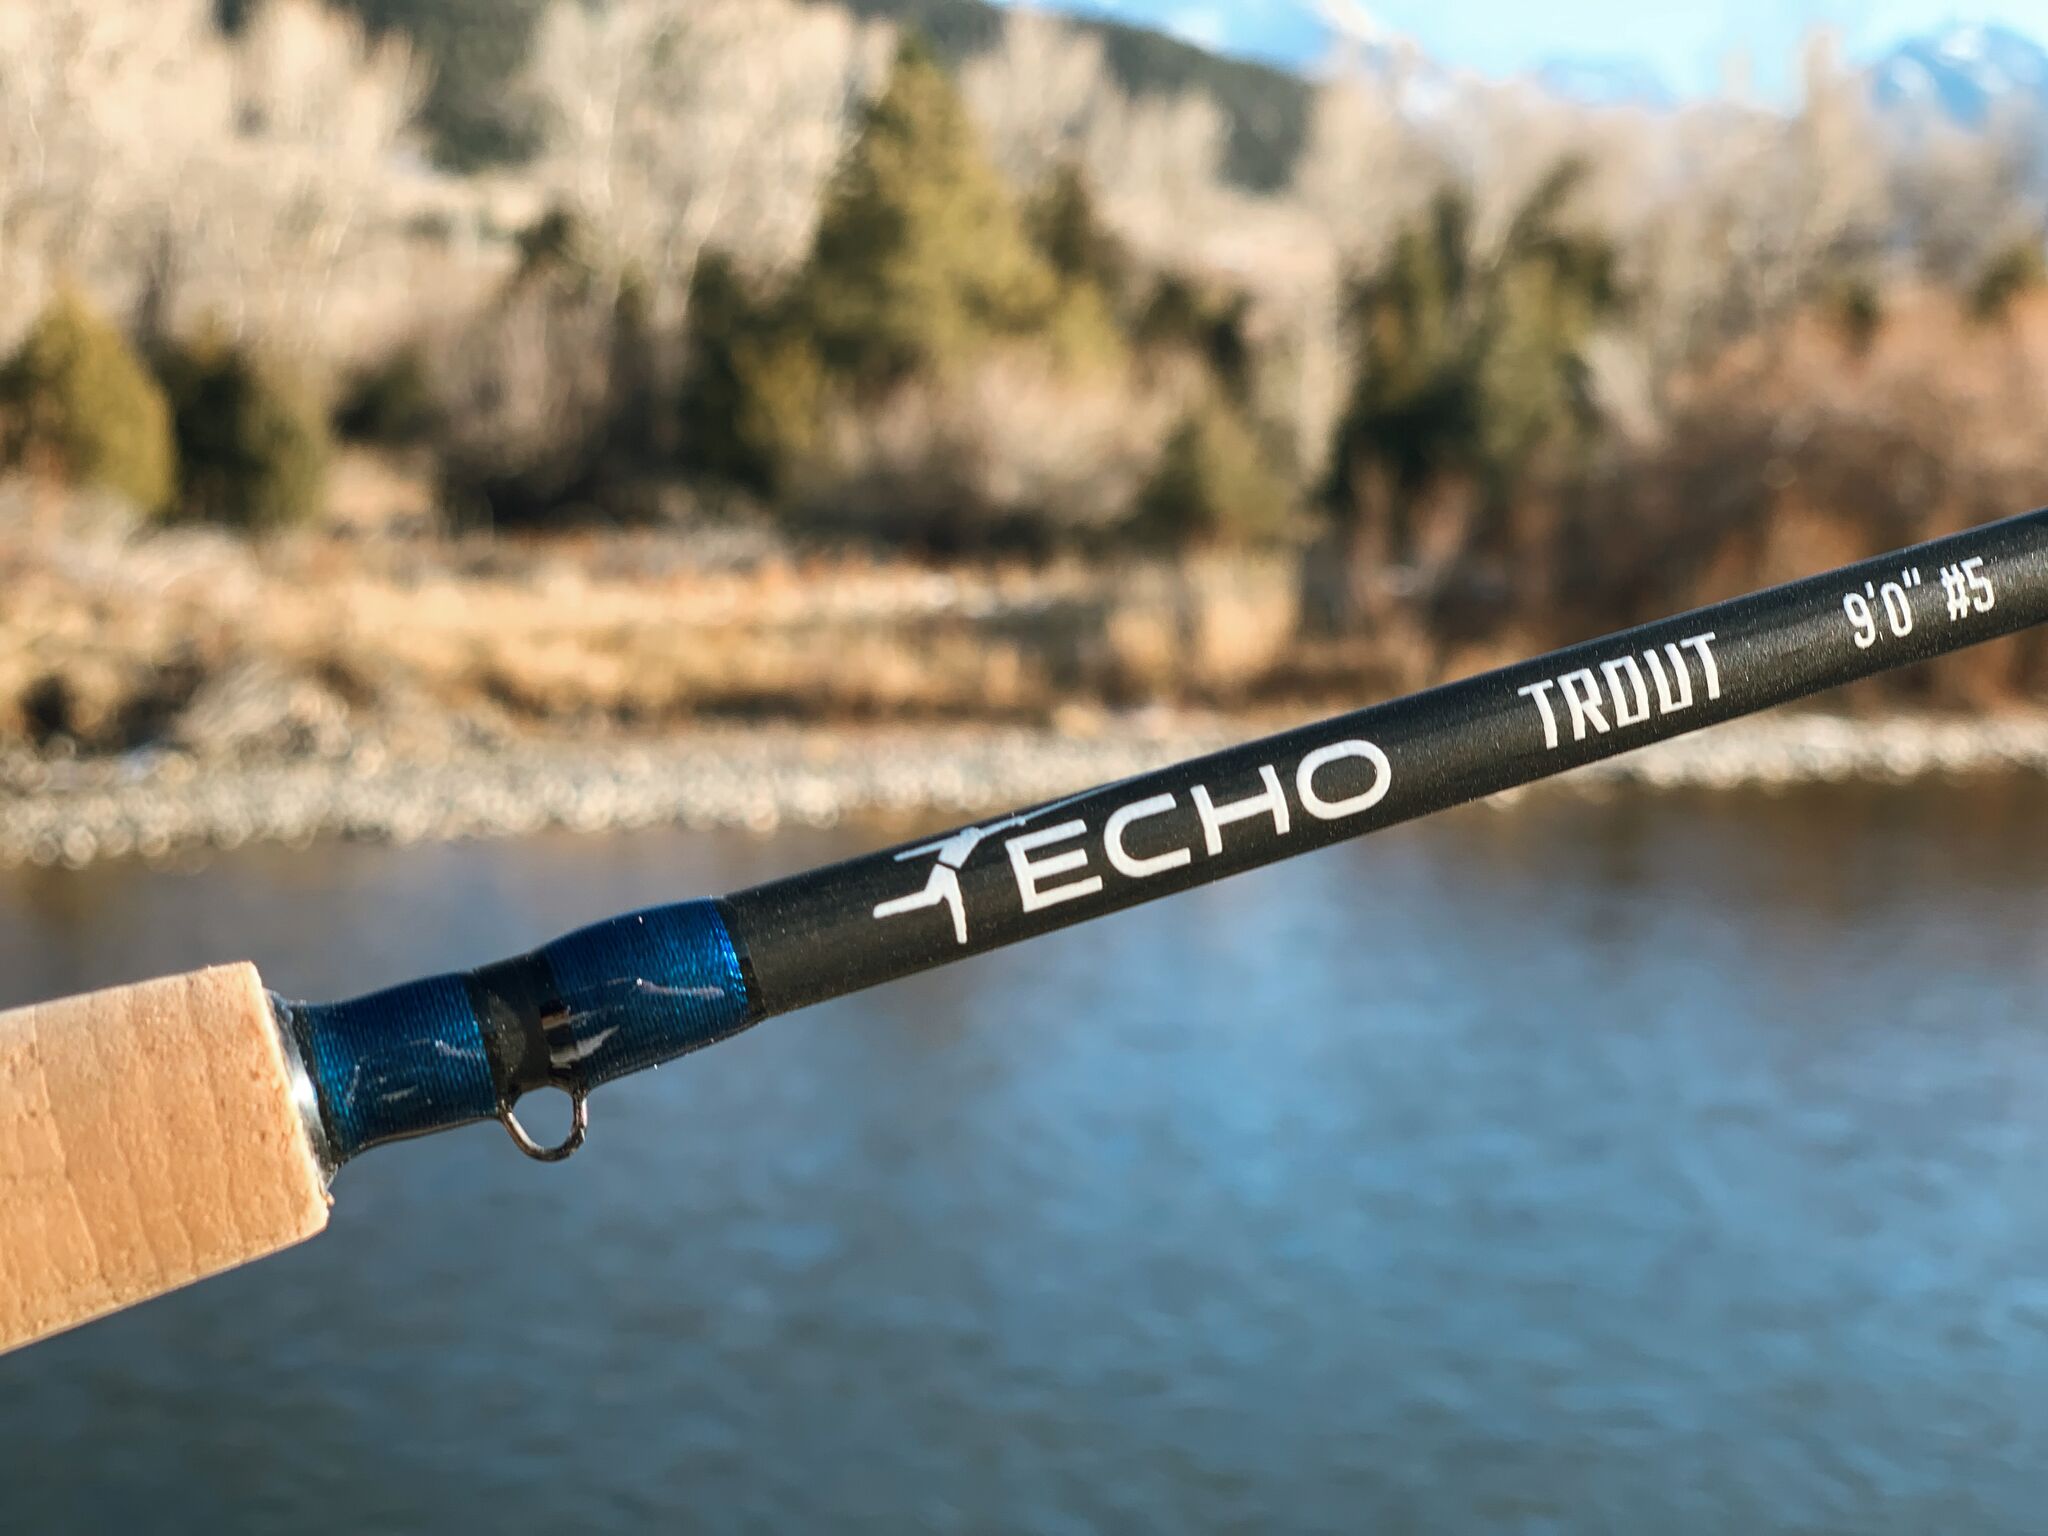 https://www.yellowstoneangler.com/wp-content/uploads/2019/11/Echo-Trout.jpeg